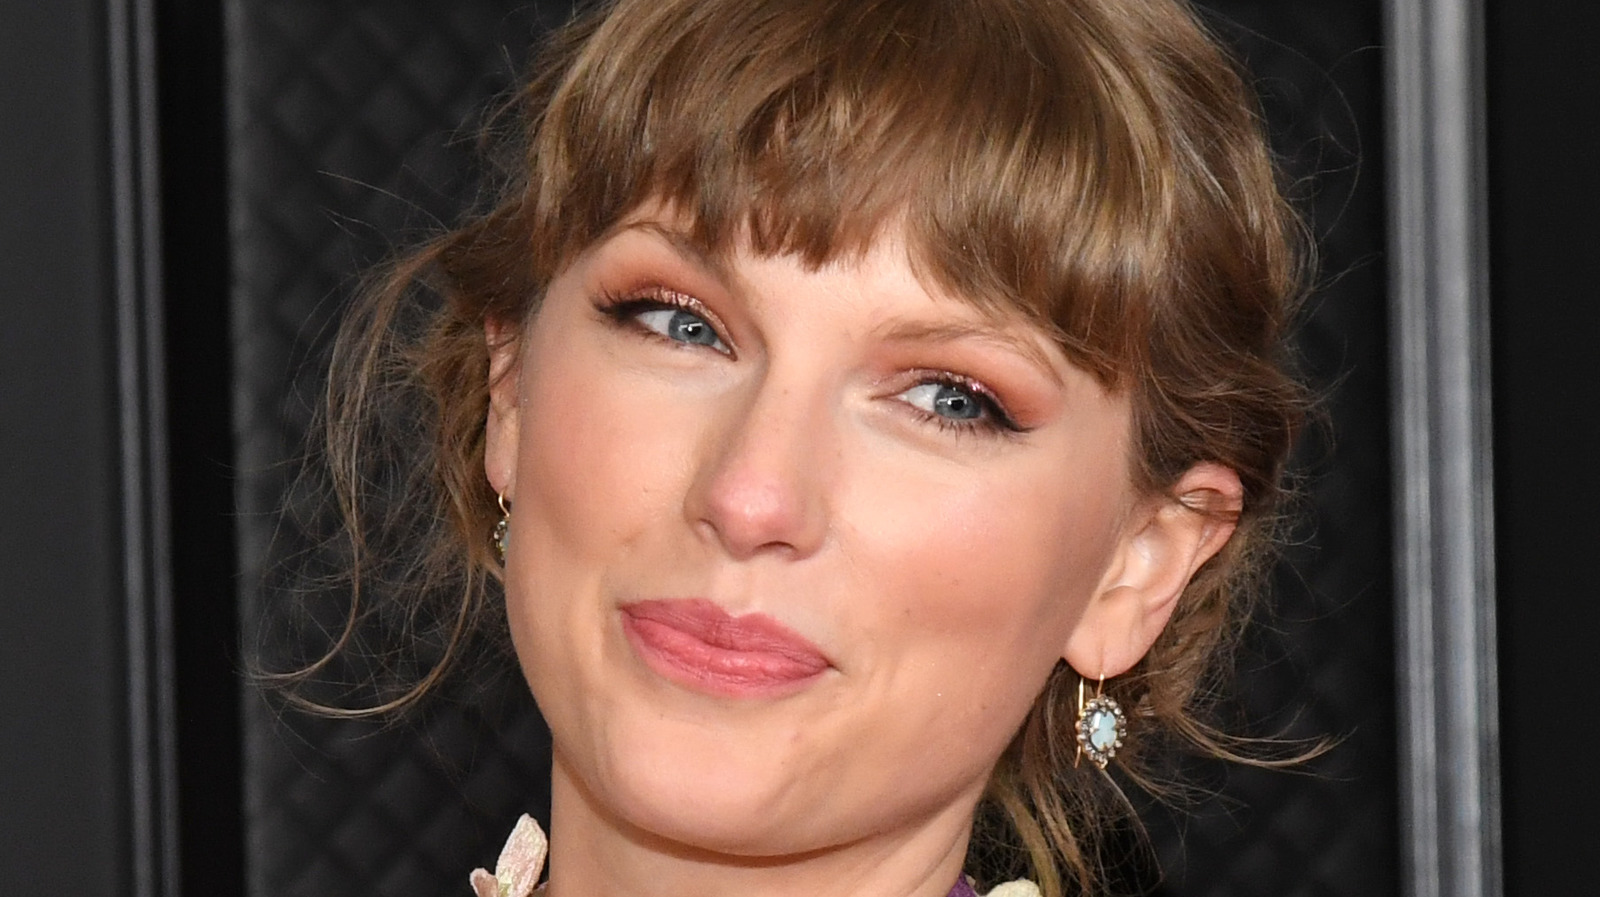 Details You Missed In Taylor Swift's Grammys Performance